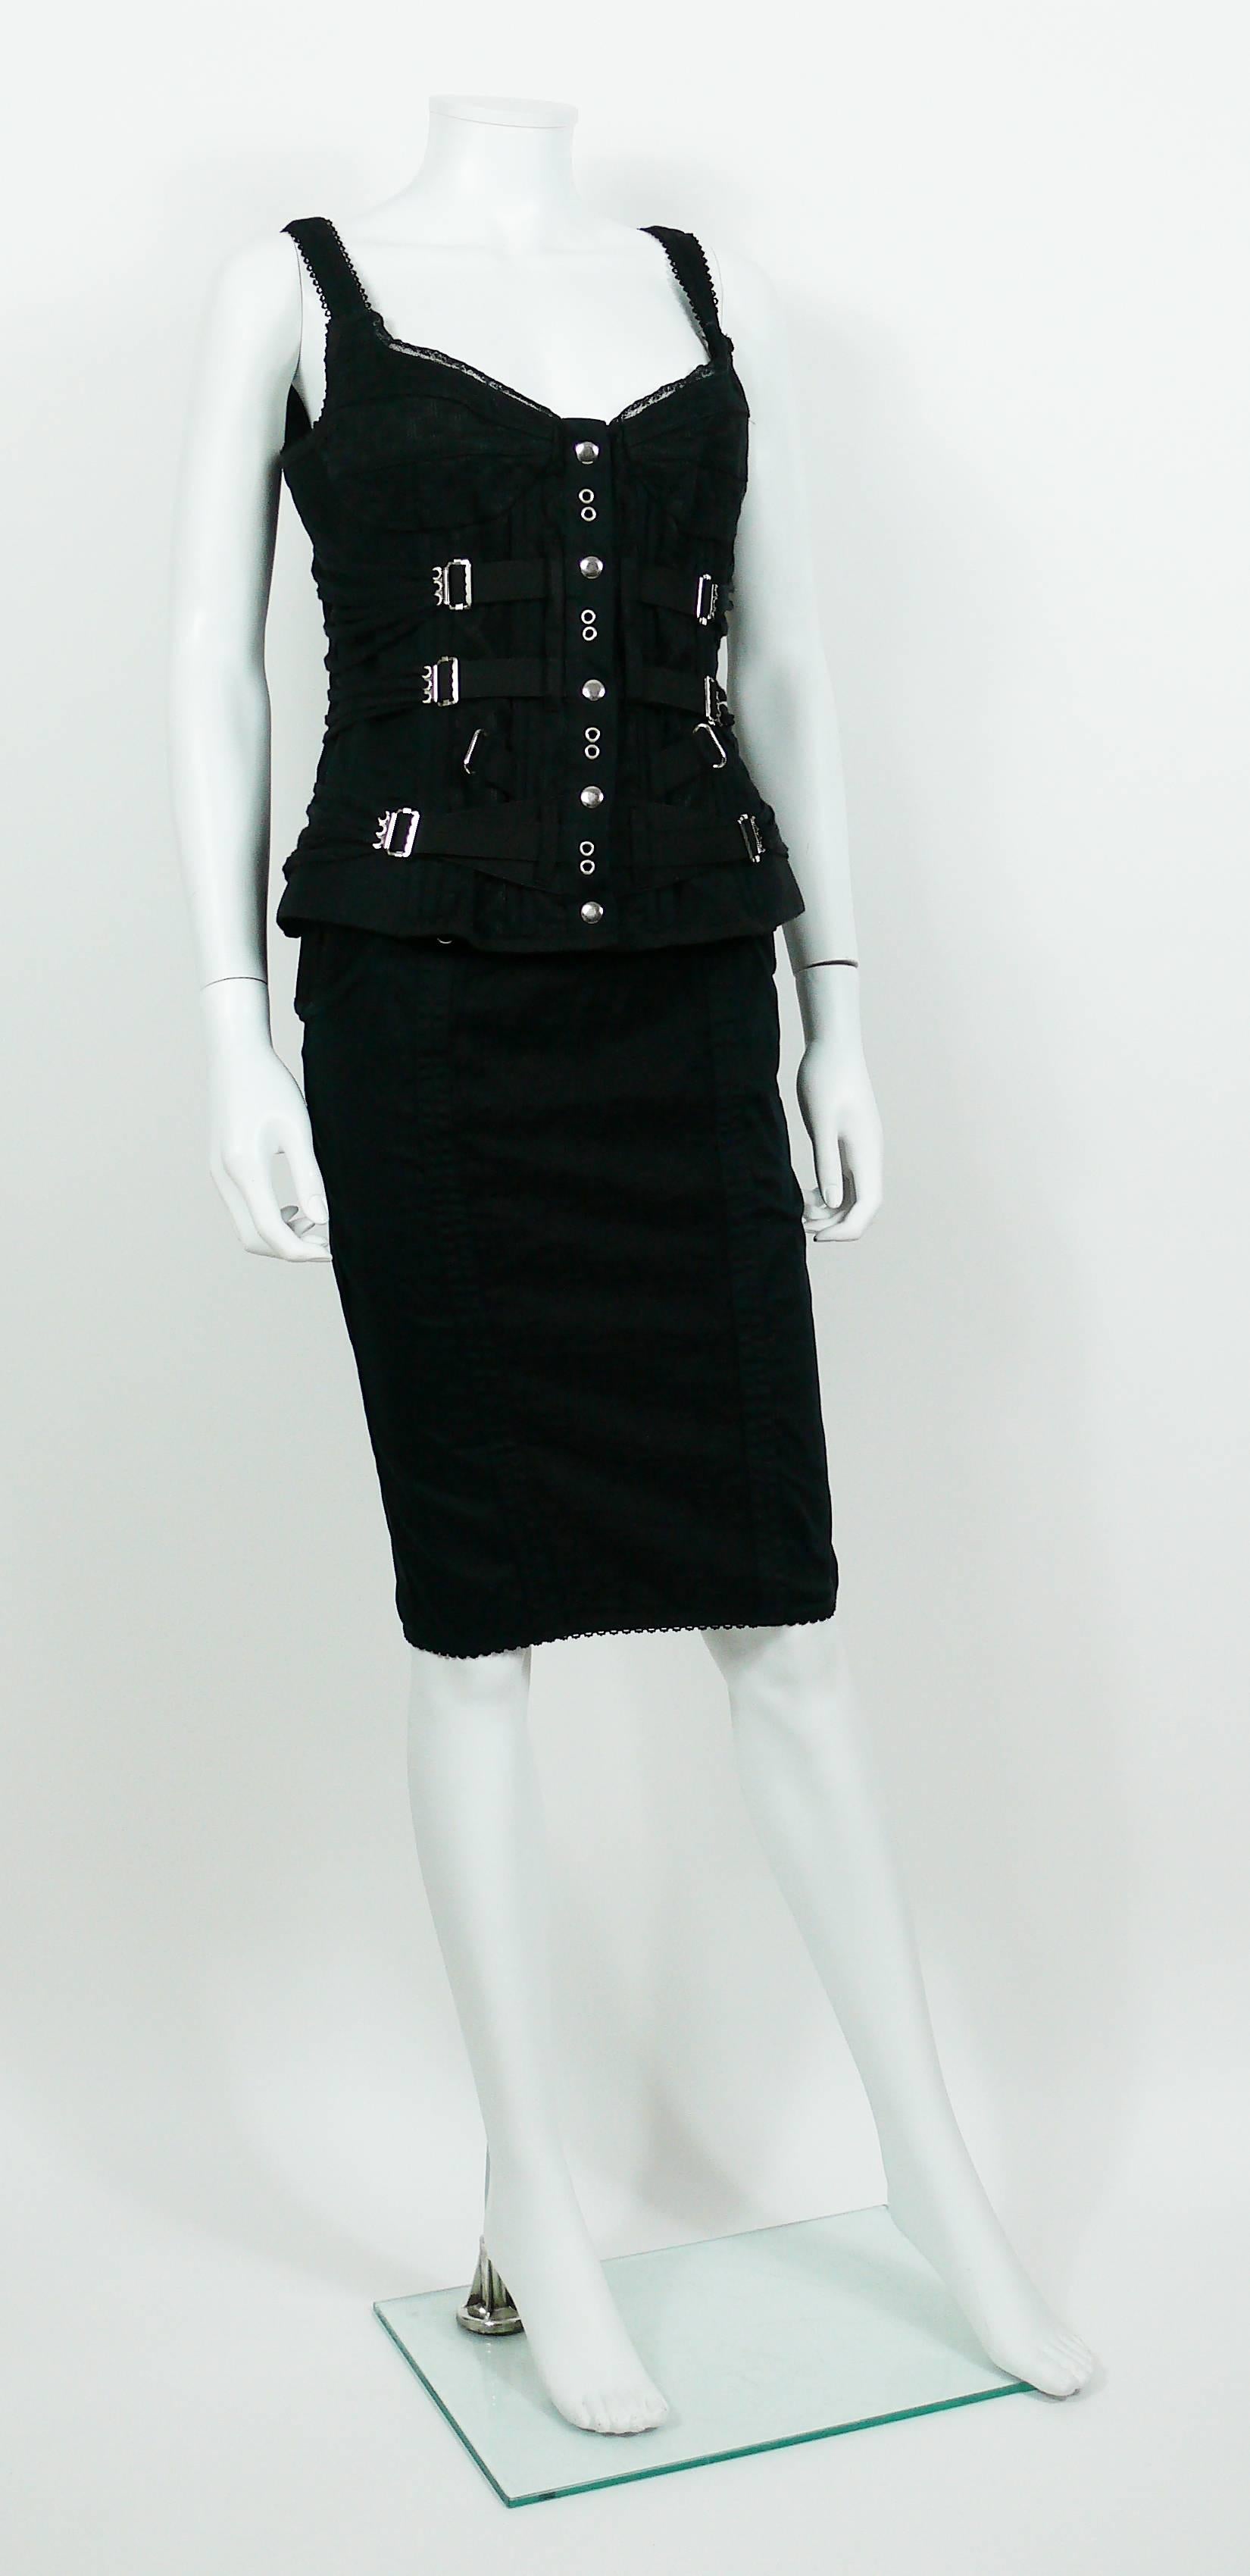 DOLCE & GABBANA D&G vintage bondage strap black skirt and bustier top ensemble.

BUSTIER features :
- Lace trim.
- Front snap buttoning.
- Boned front and back.
- Lace and strap detail at front and side.
- Stretchy textile.
- Silver toned